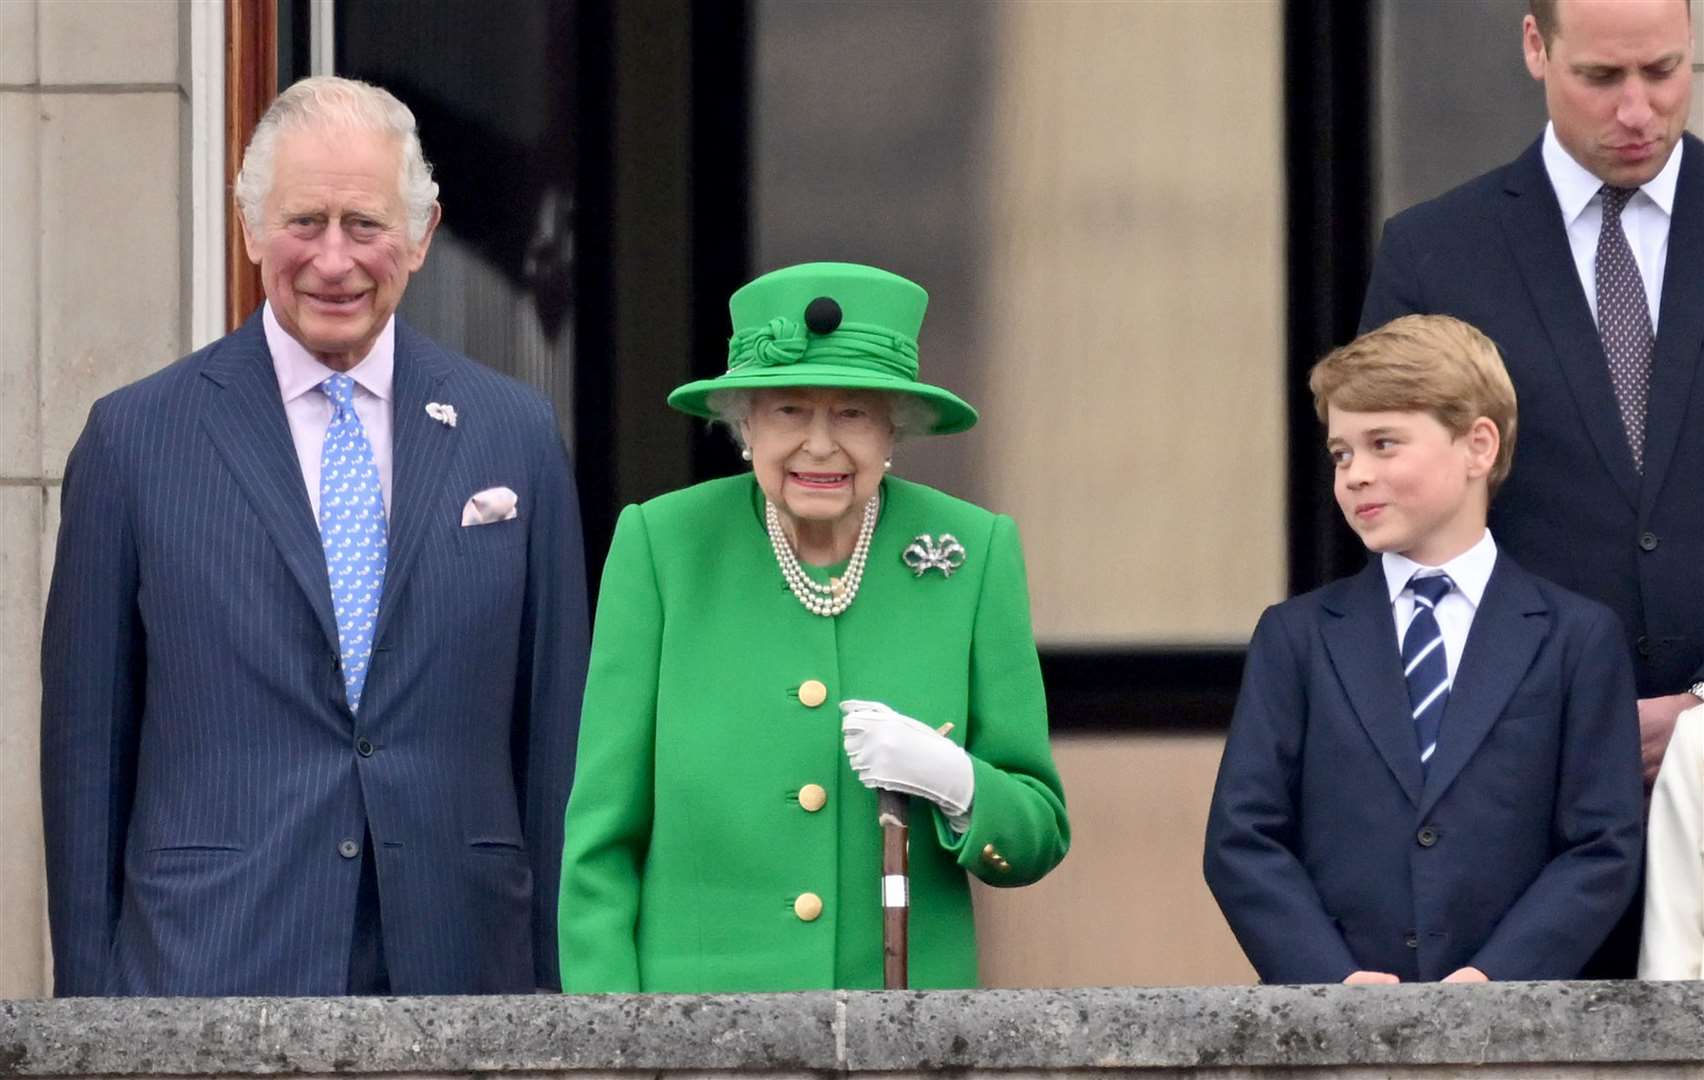 The Queen holding her walking stick during a Jubilee balcony appearance (Leon Neal/PA)